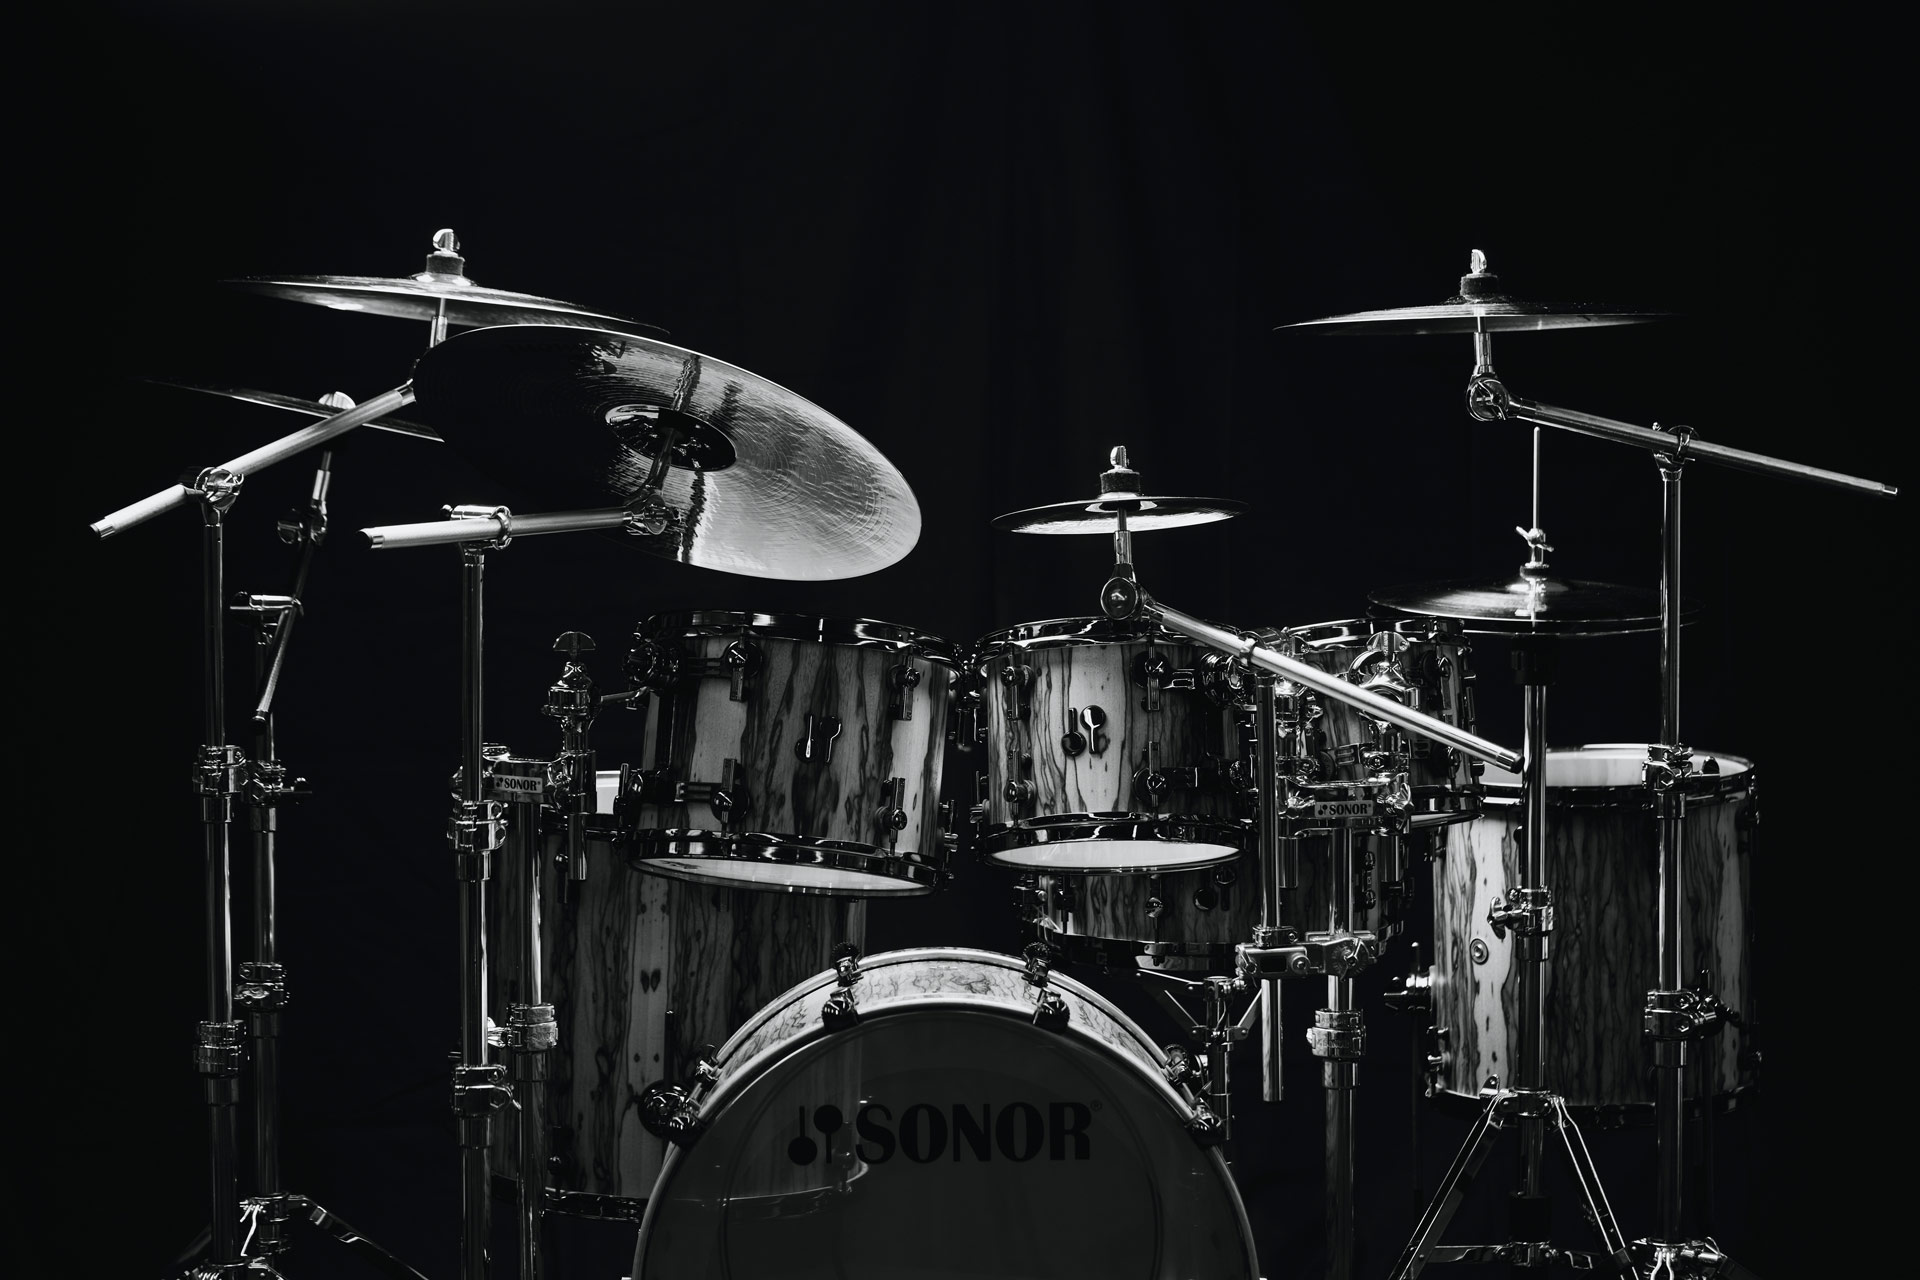 SONOR Drumset